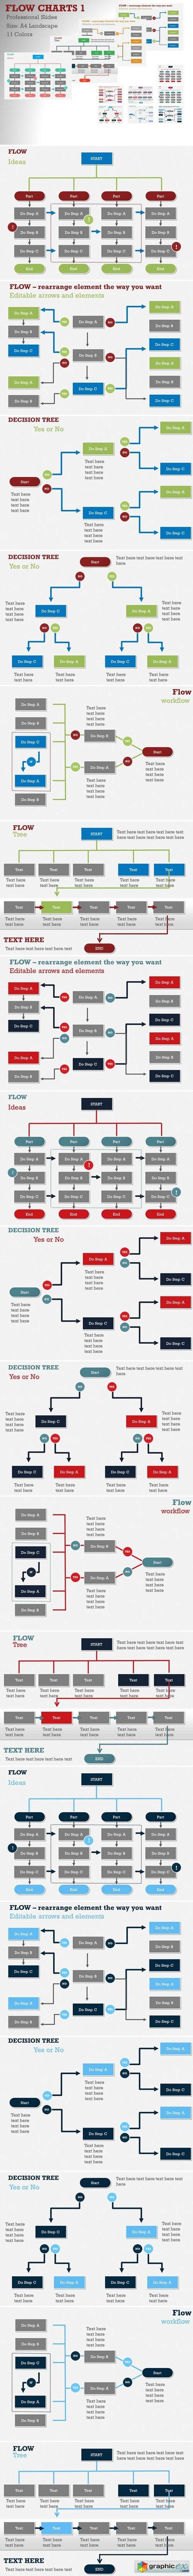 Flow Charts 1 PowerPoint Template